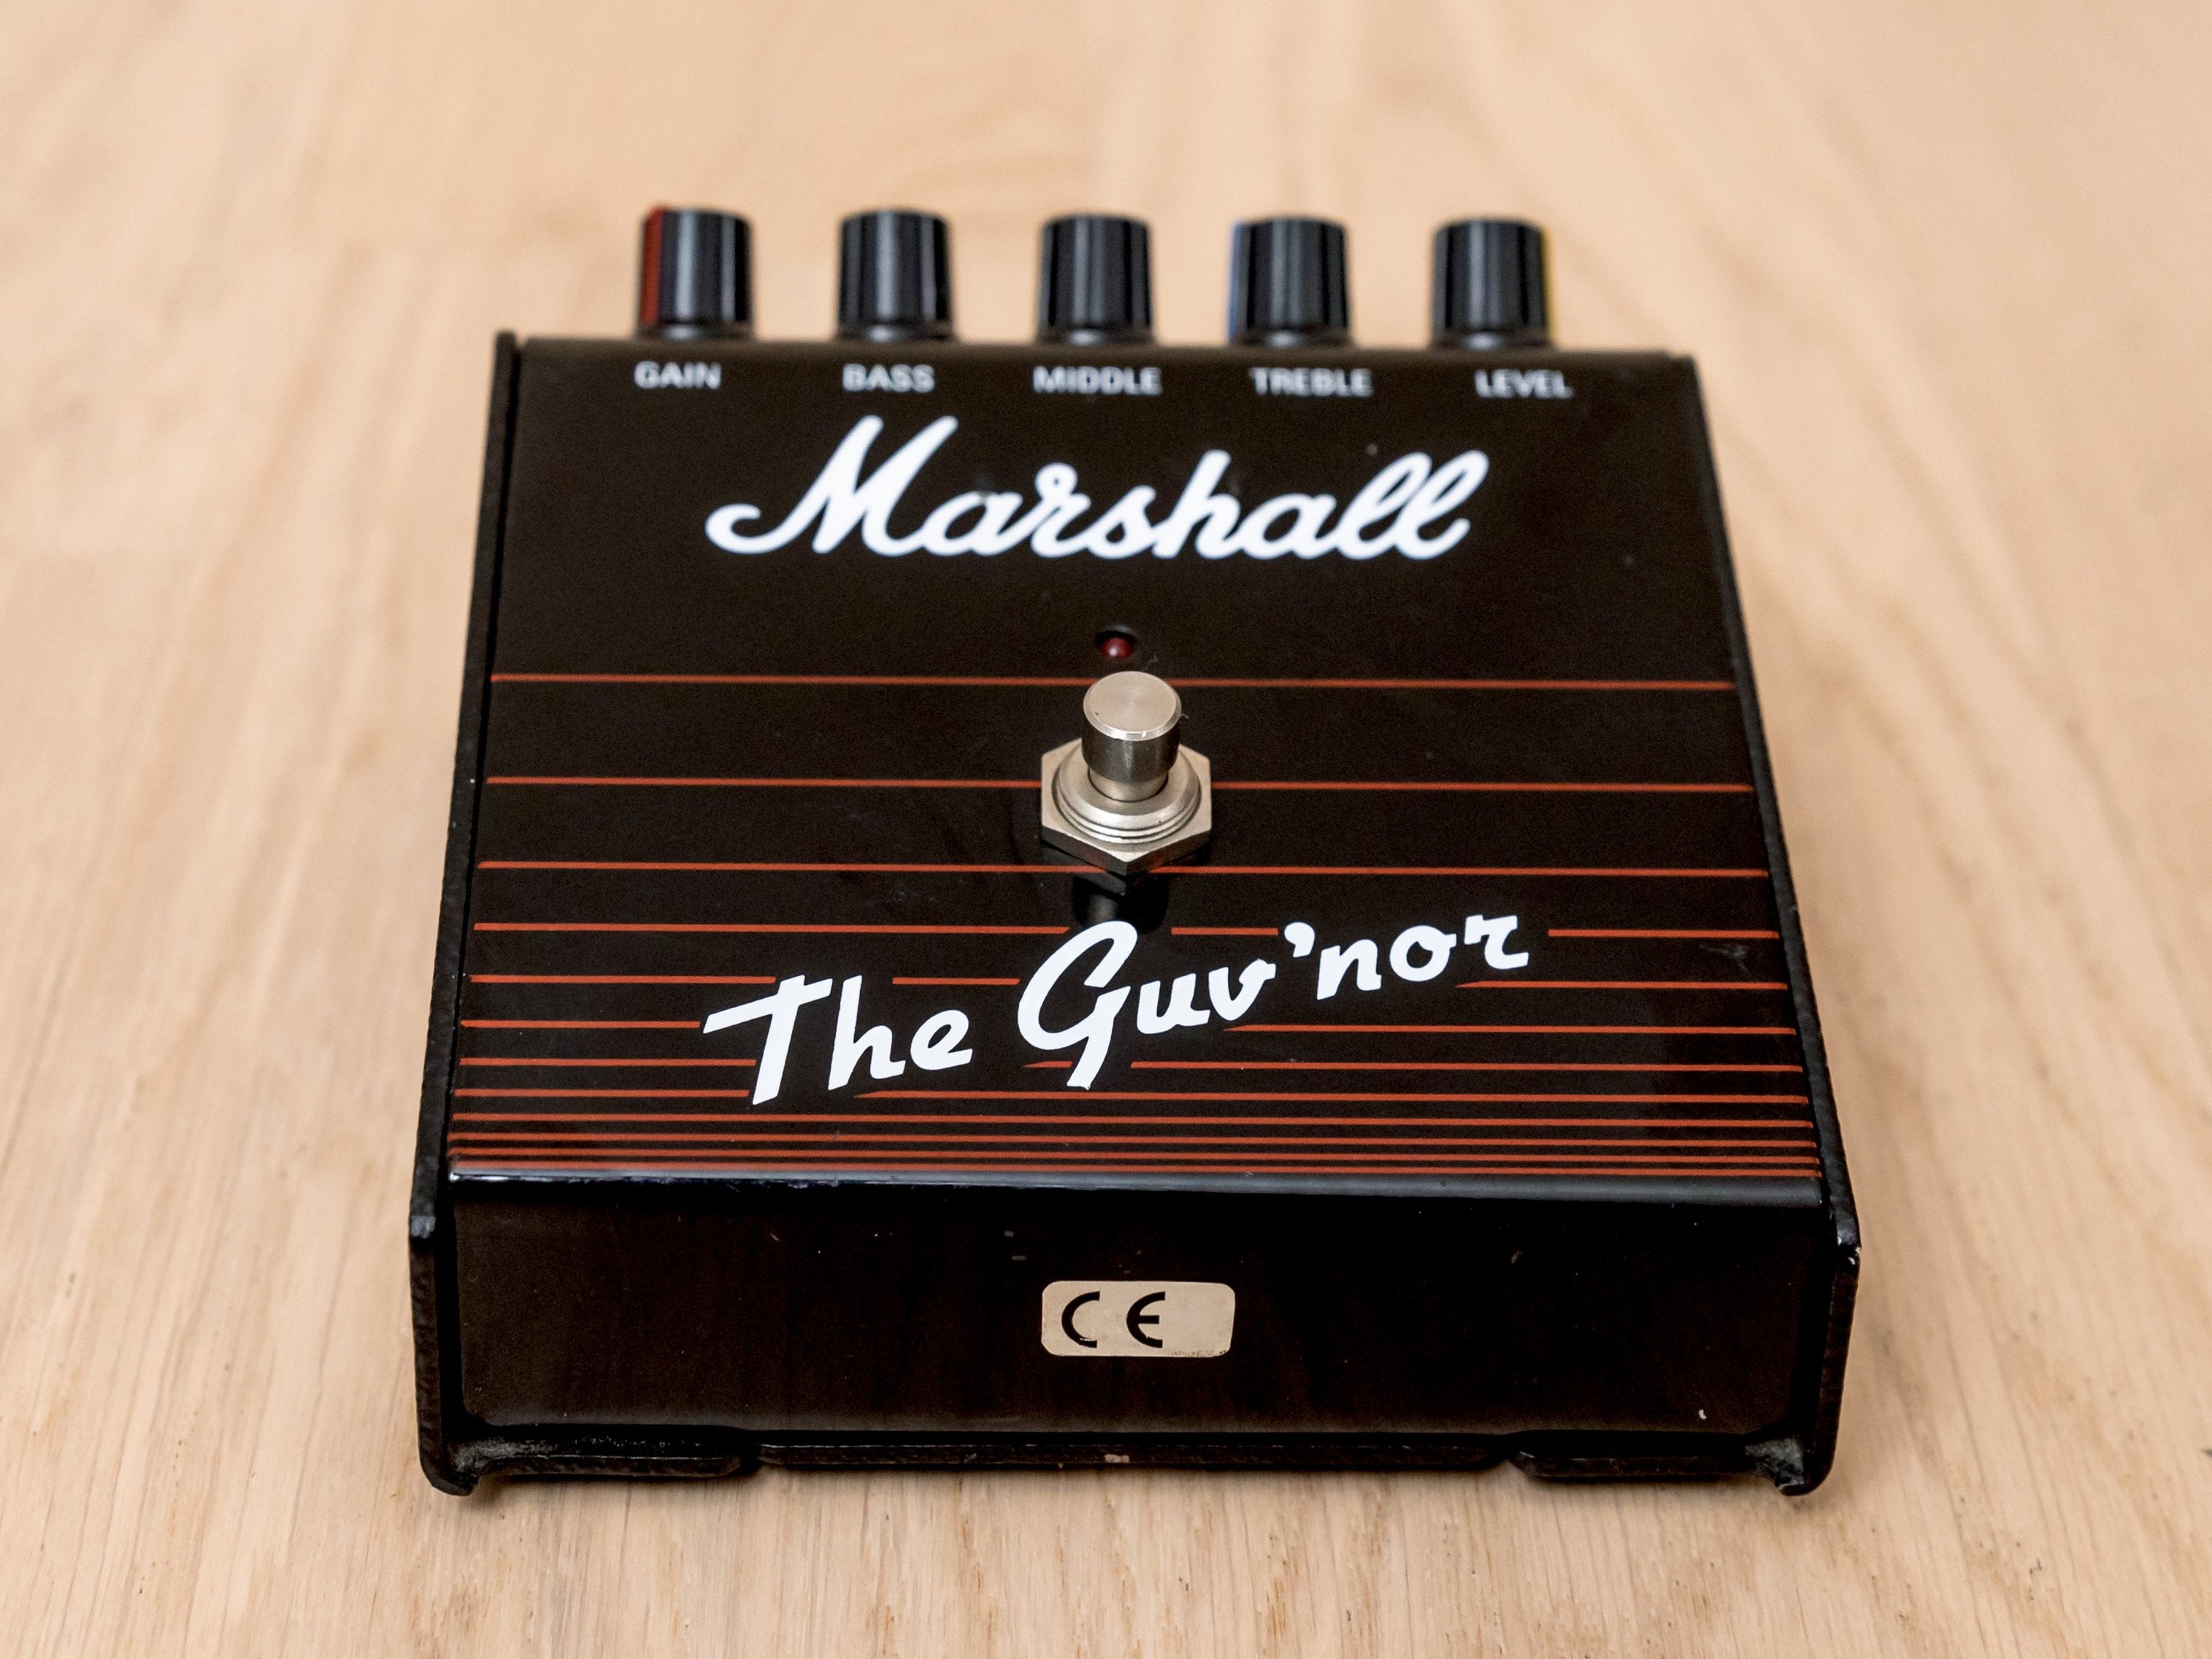 Marshall The Guv'nor Mk1 Vintage Guitar Effects Pedal